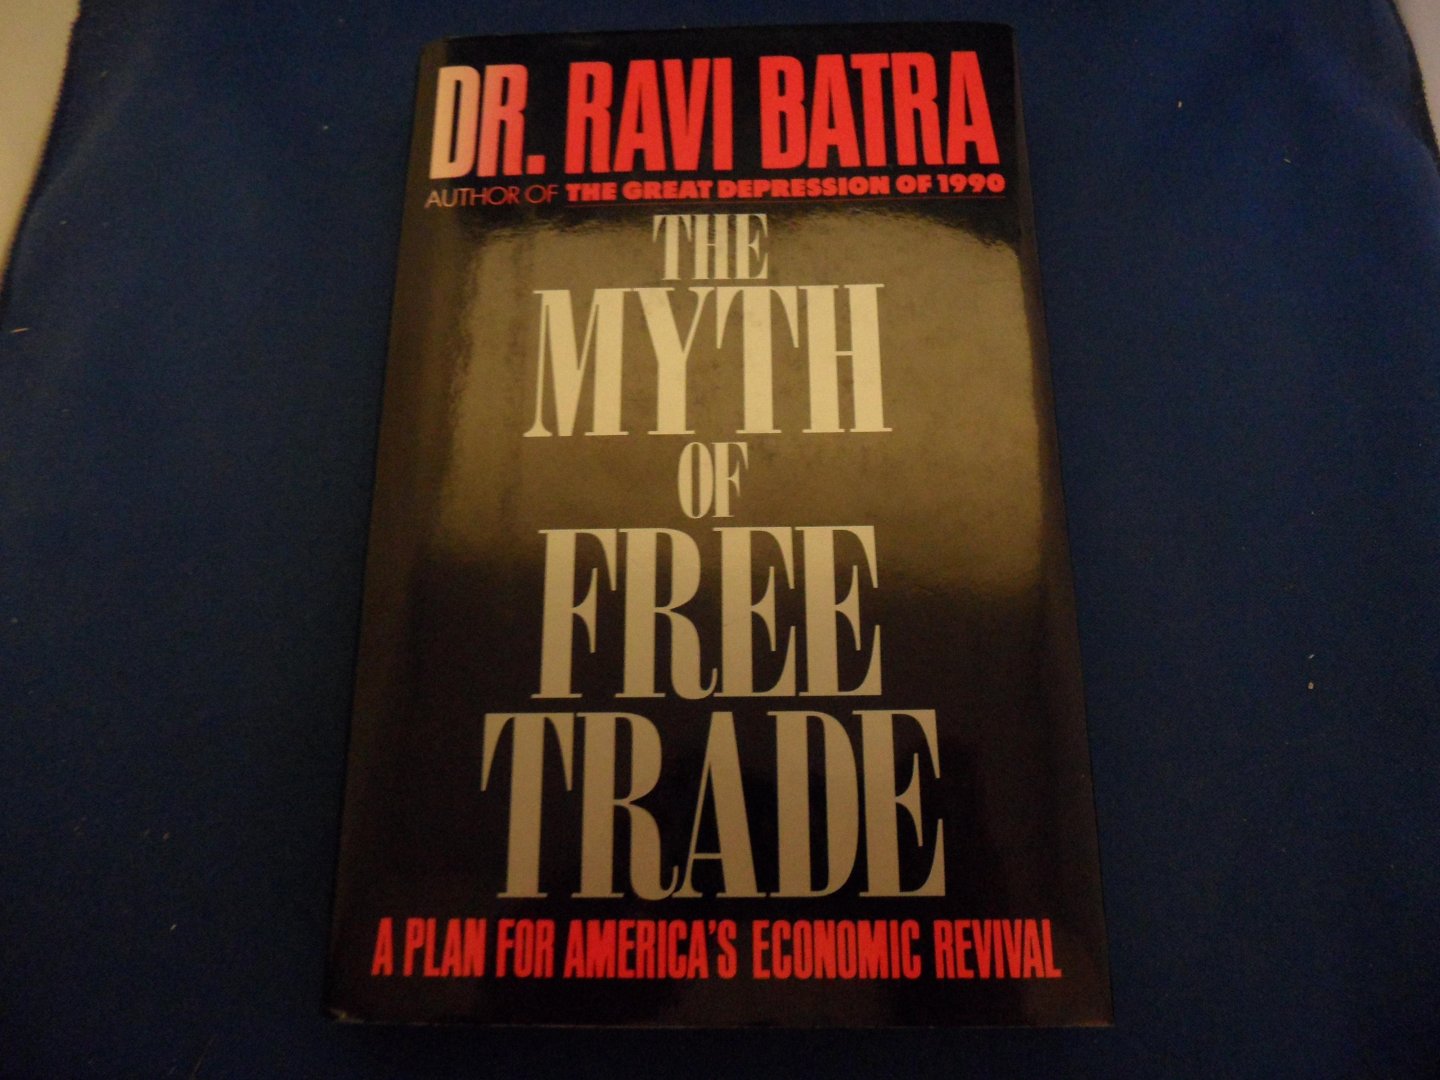 Batra, Dr. Ravi - The myth of free trade. A plan for America's Economic Revival